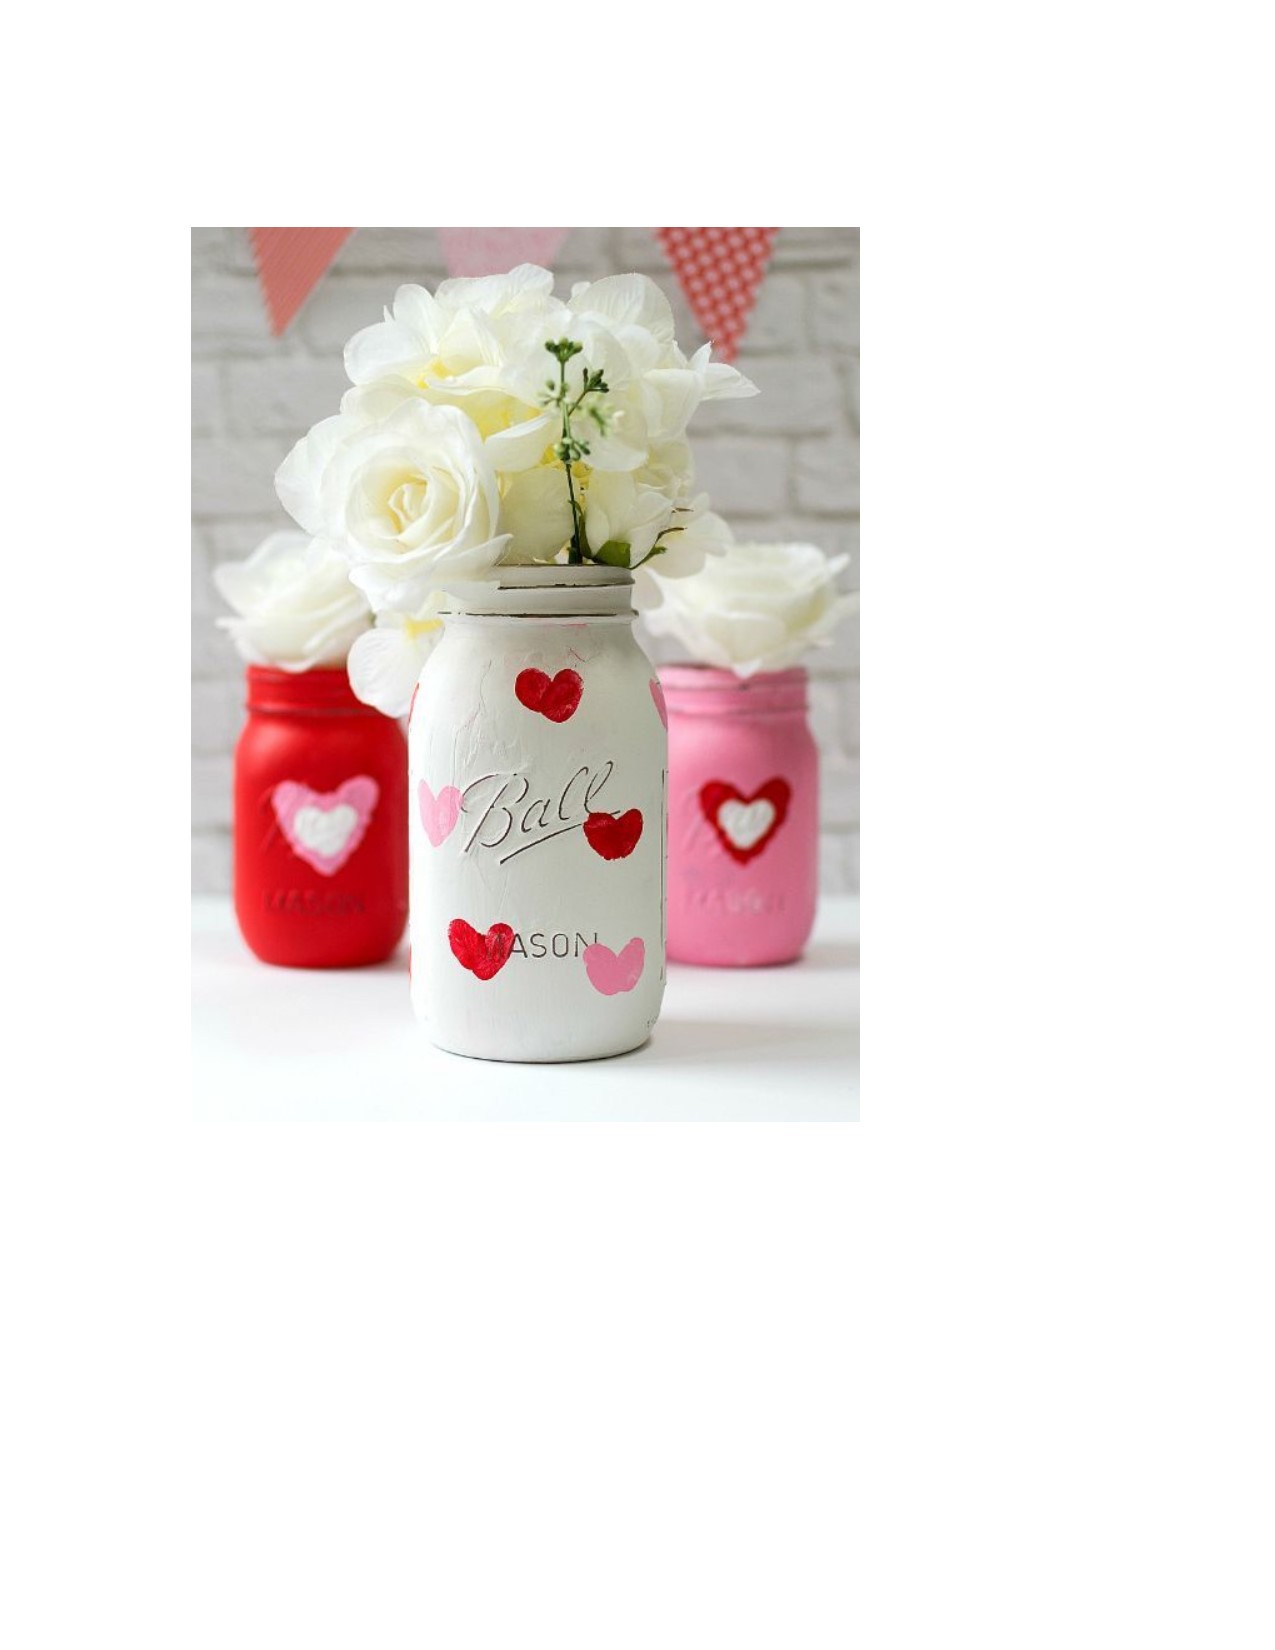 Enjoy decorating a glass jar for your special Valentine!